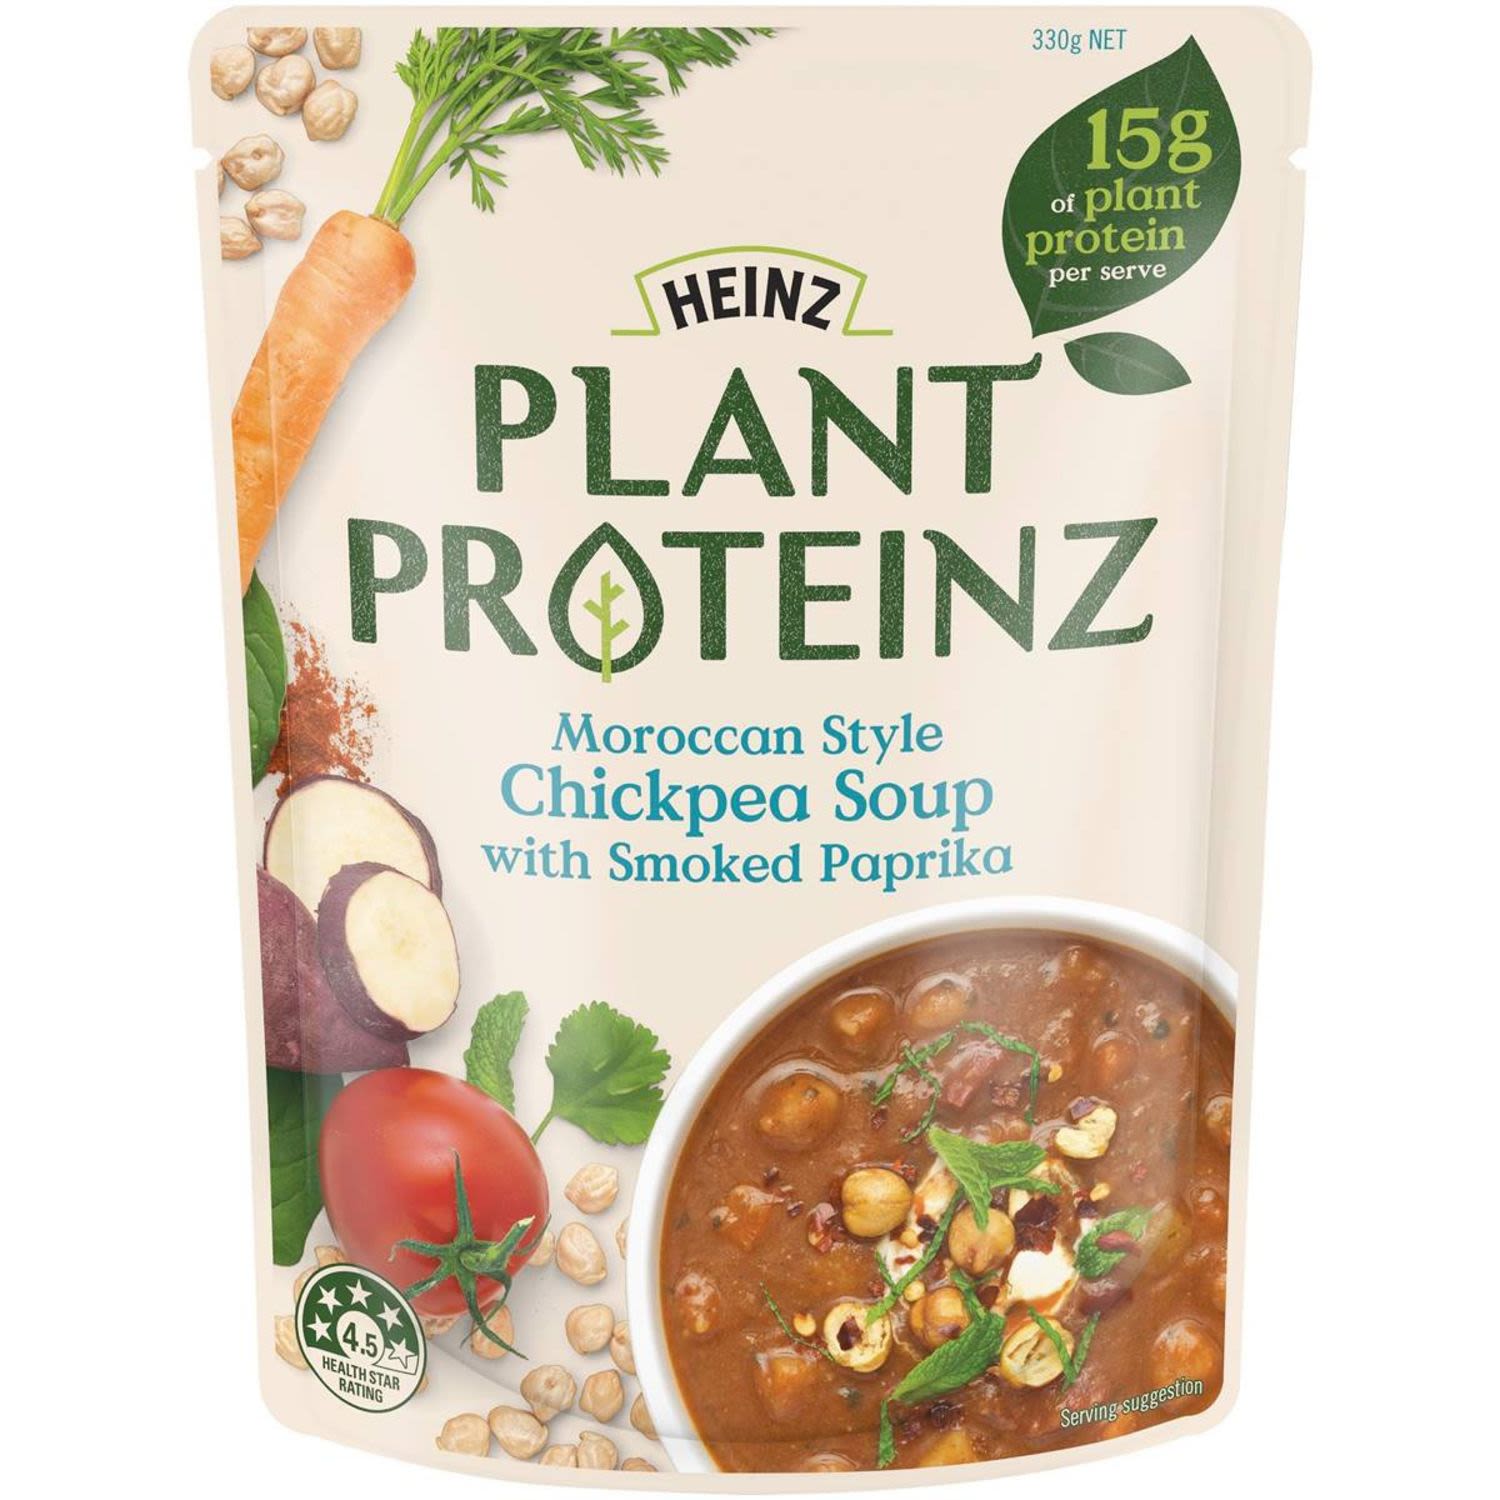 Heinz Plant Proteinz Moroccan Style Chickpea Soup, 330 Gram